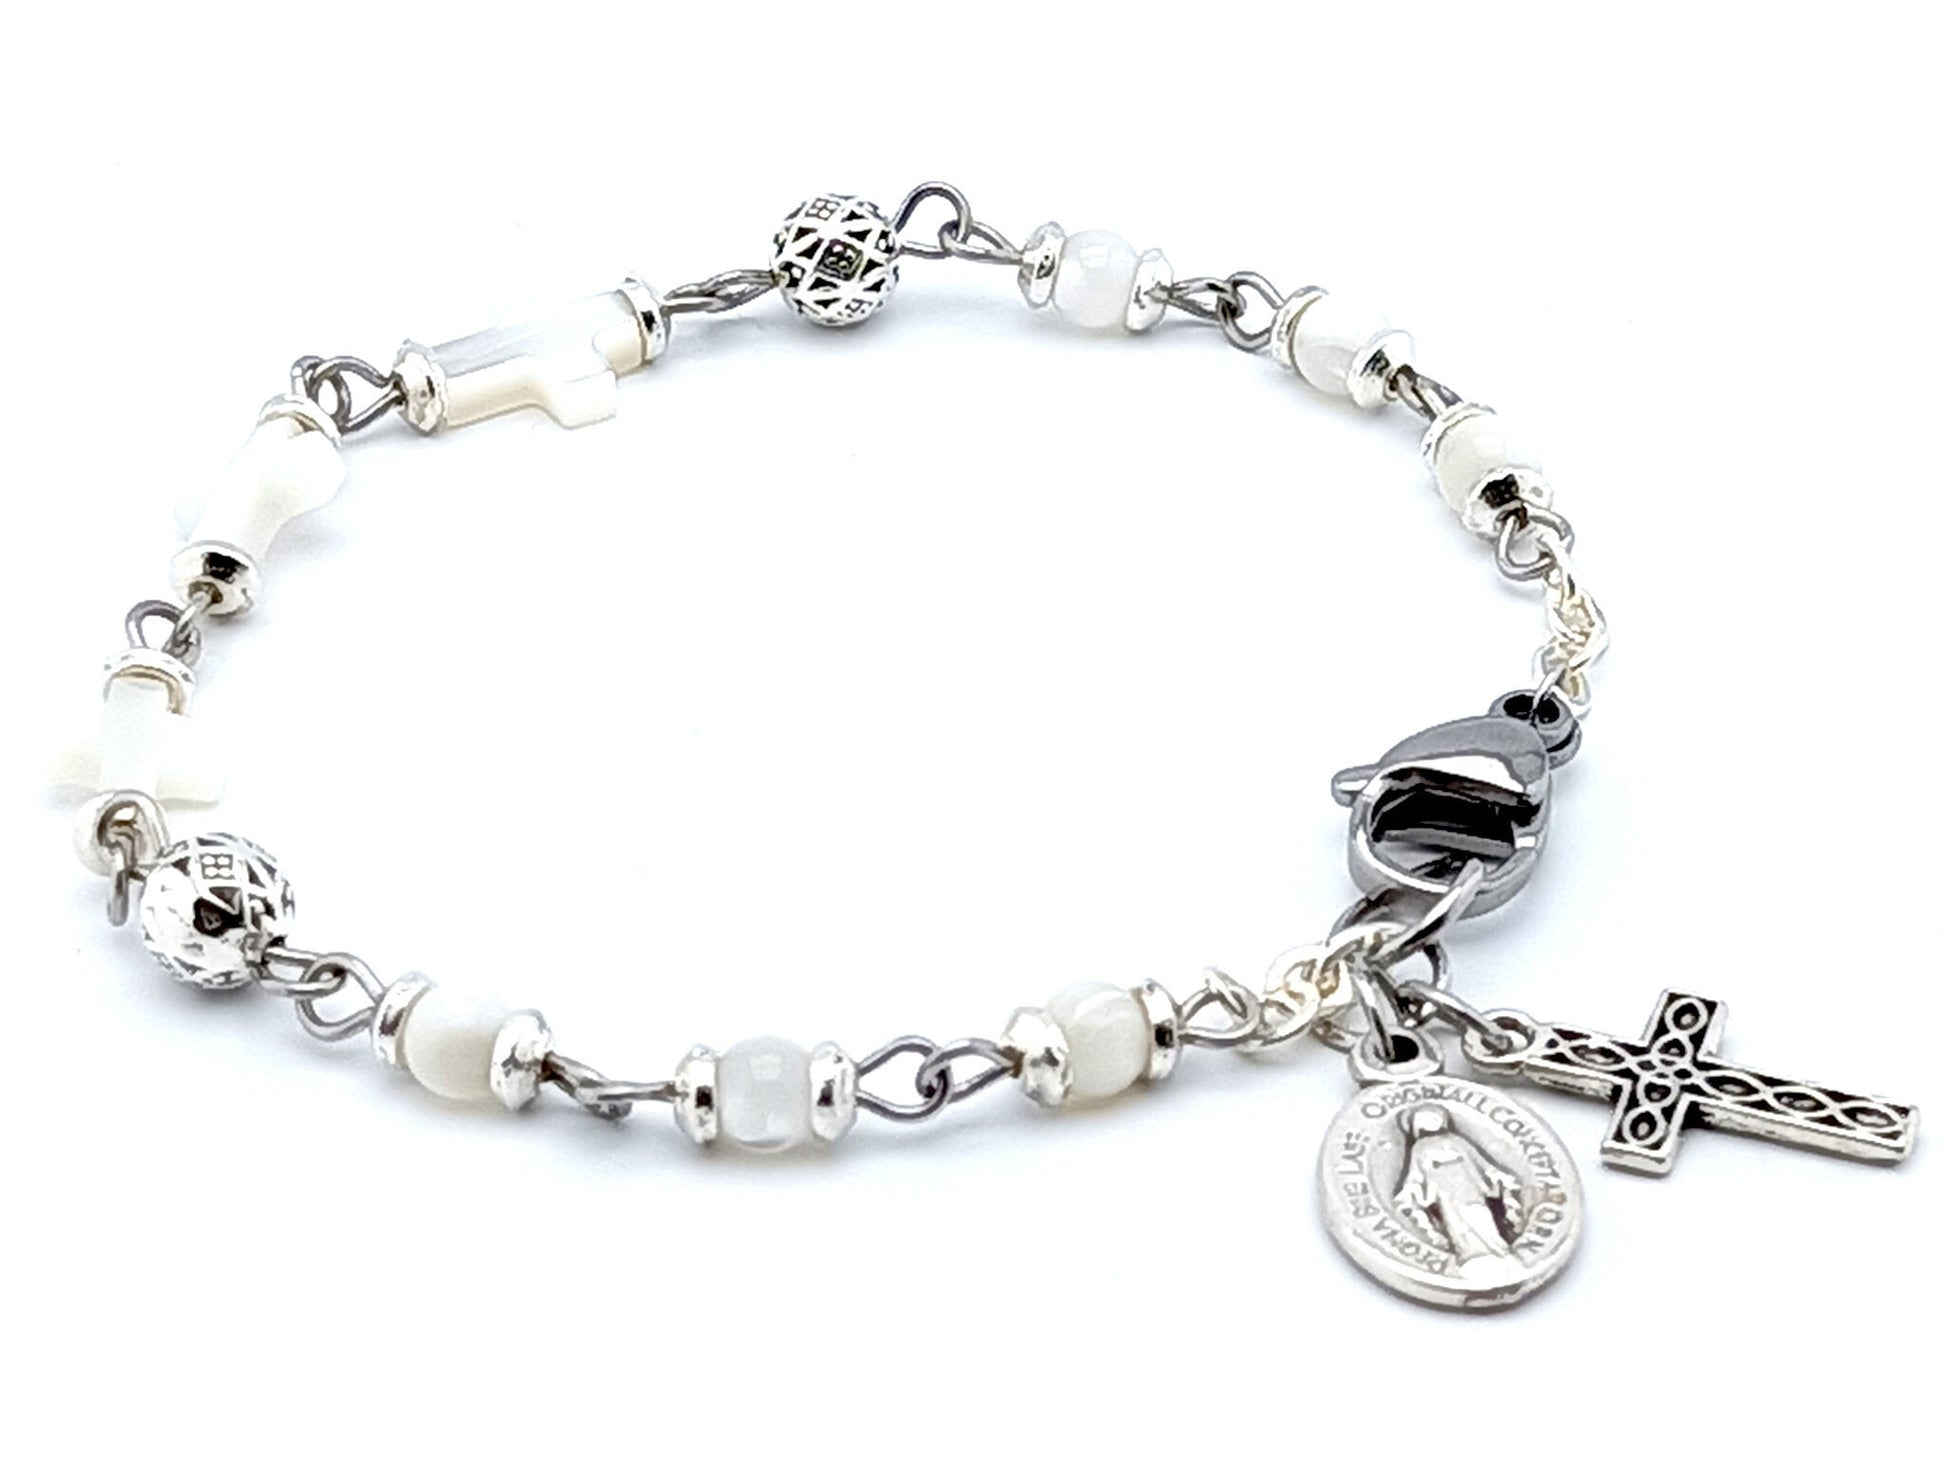 Three Hail Mary unique rosary beads prayer beads bracelet with mother of pearl and silver beads, stainless steel clasp, silver cross and miraculous medal.